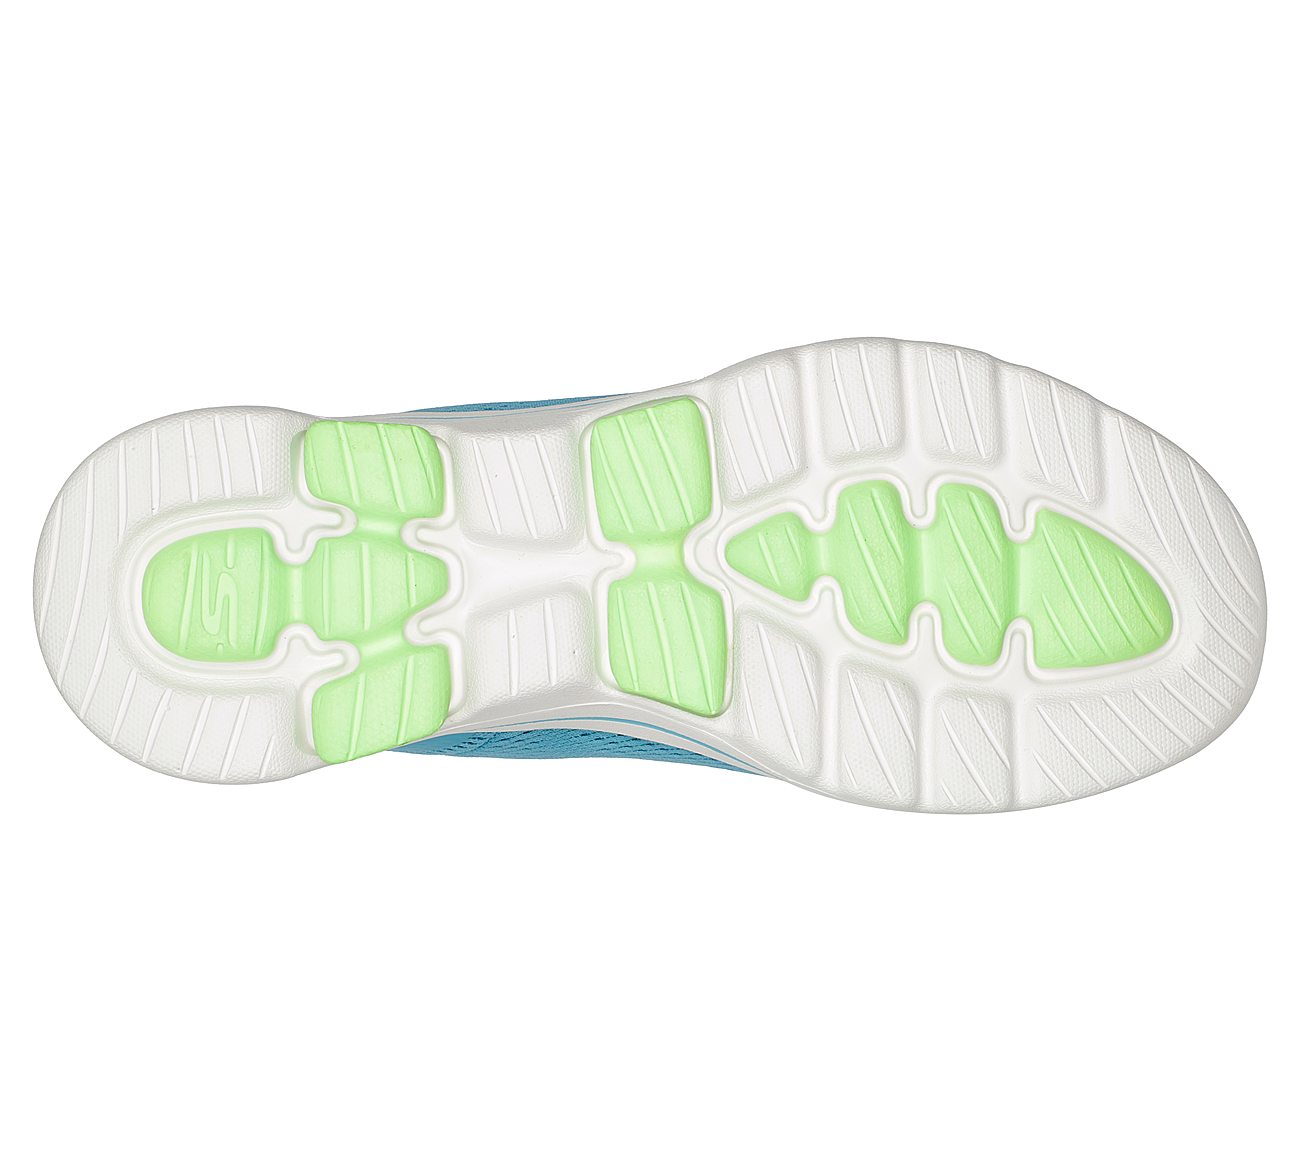 GO WALK 5, TURQUOISE/LIME Footwear Bottom View